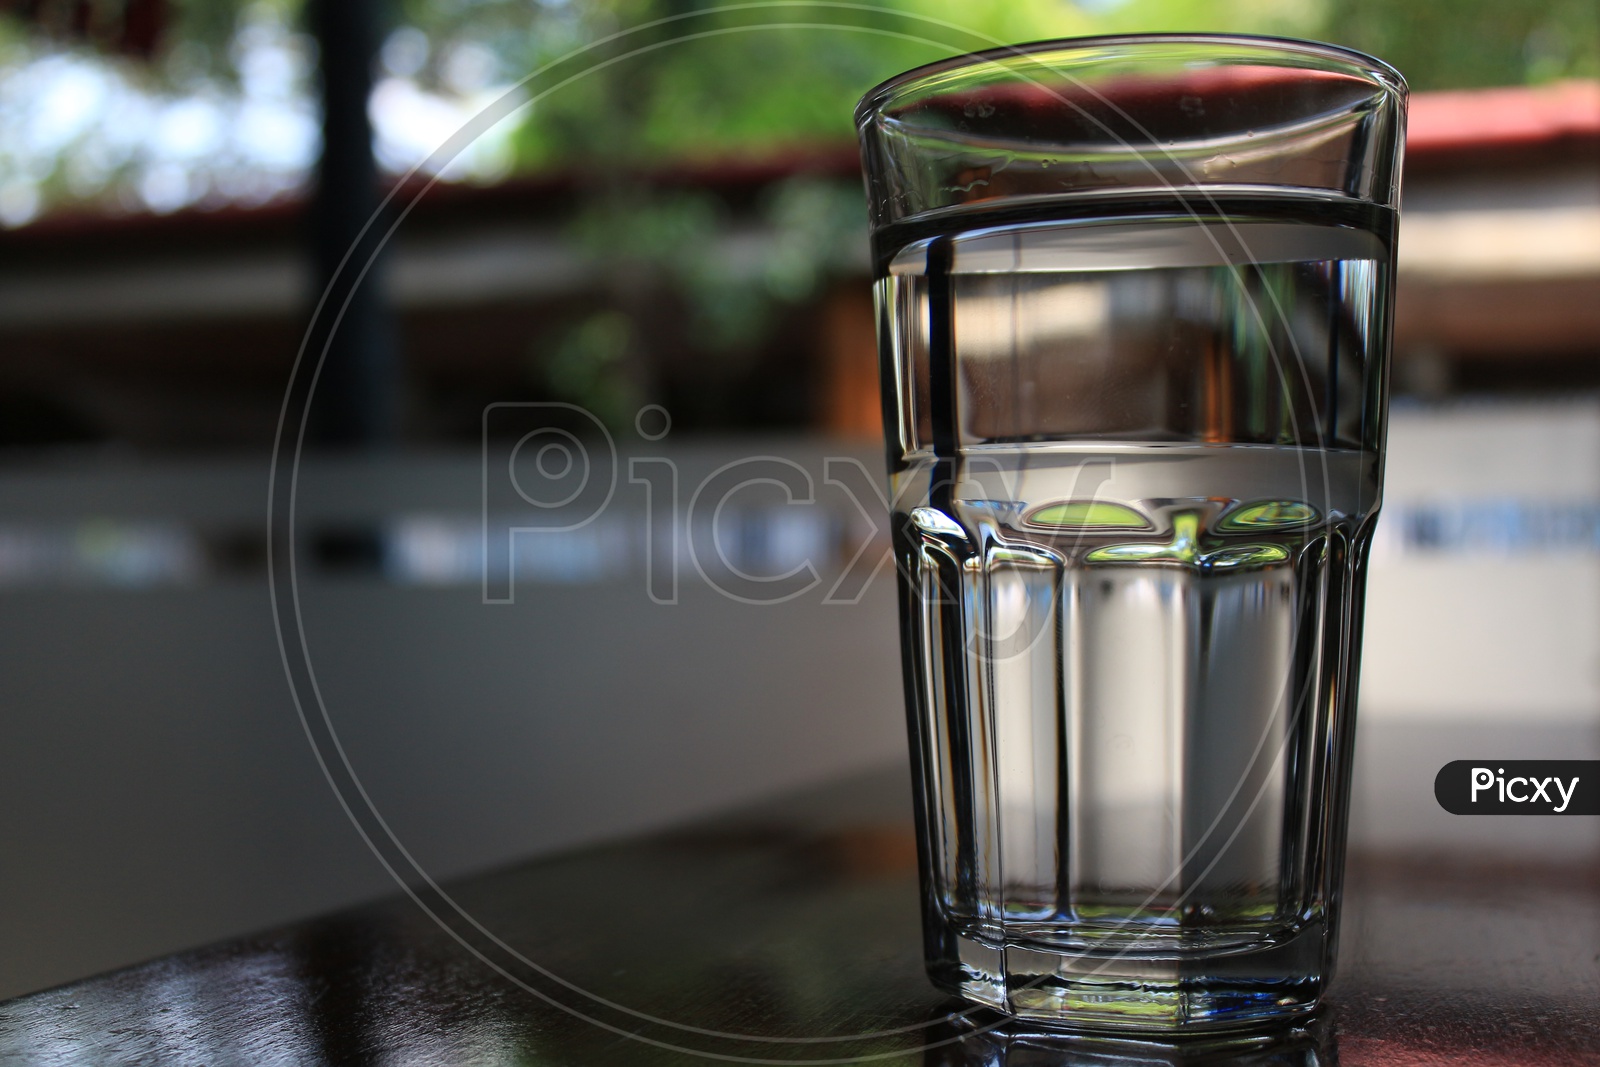 Glass Of Water On a Table